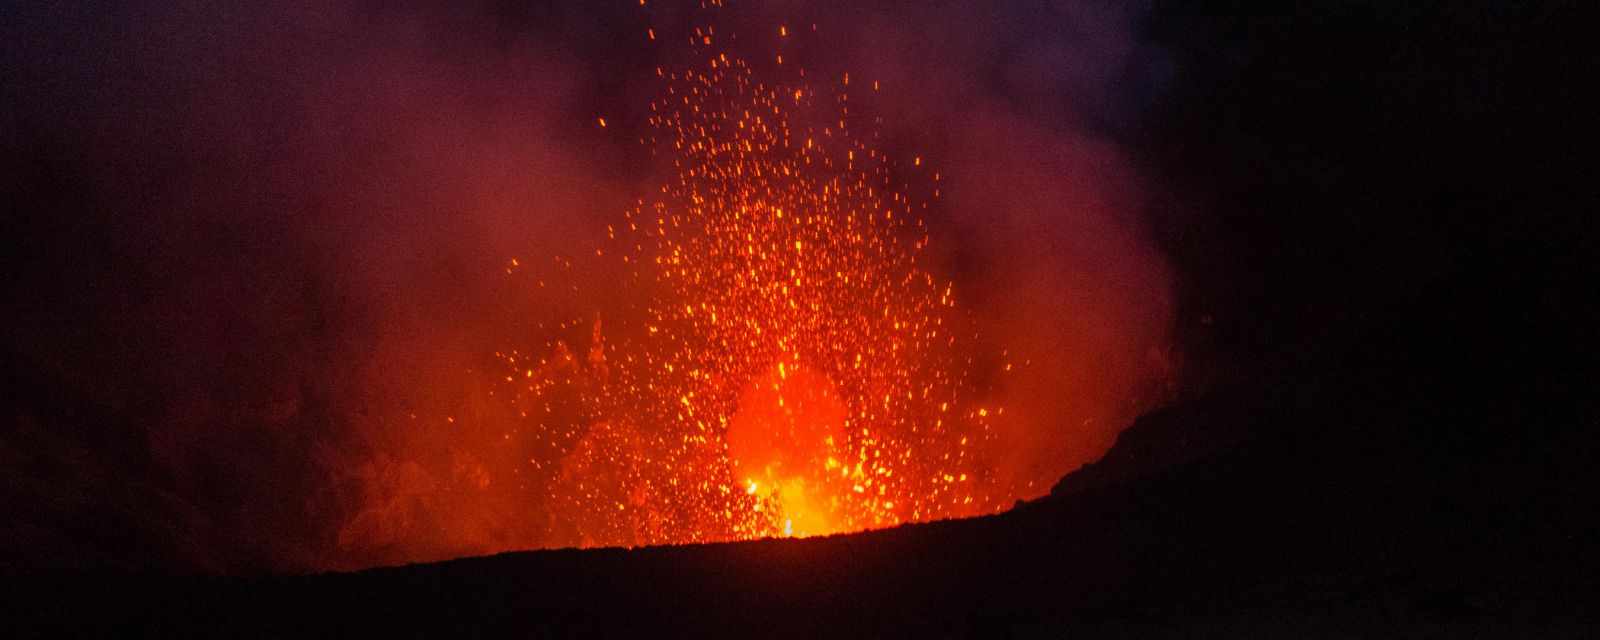 Fiery explosion of Yasur in the evening